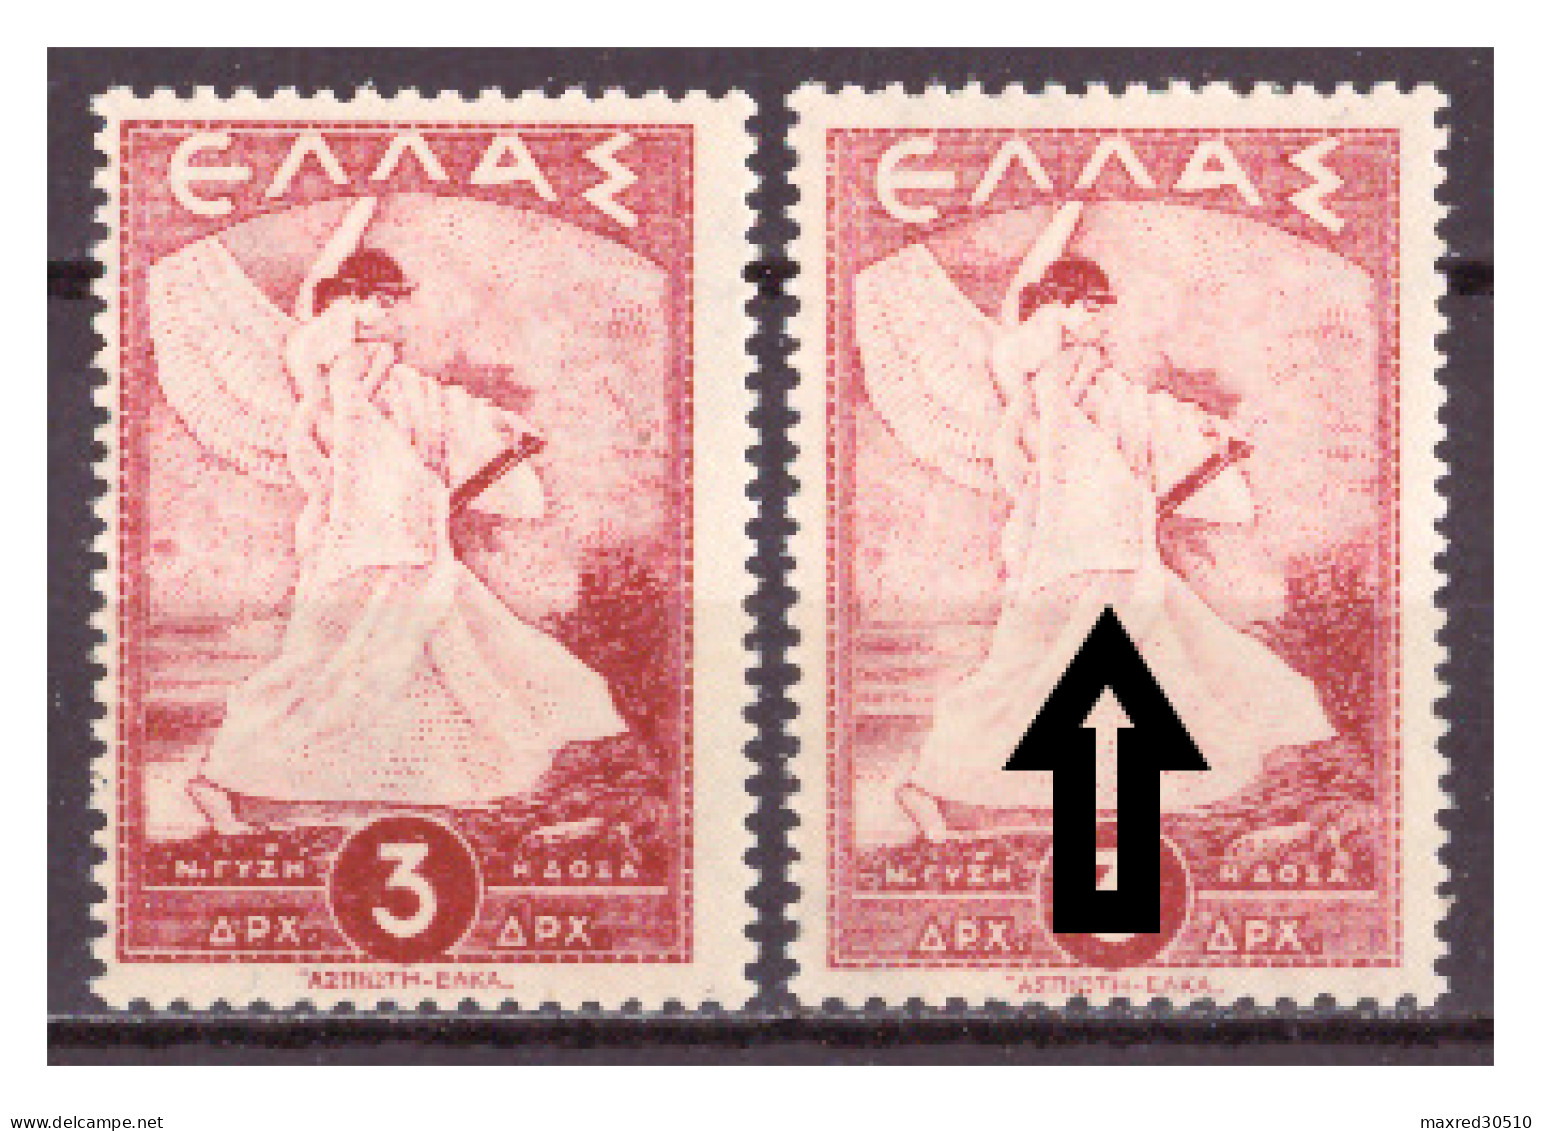 GREECE 1945 2X3L. OF THE "GLORY ISSUE" THE 2ND ONE (SEE ARROWS) WITH MIRROR PRINTING AT THE GUM ERROR MNH - Errors, Freaks & Oddities (EFO)